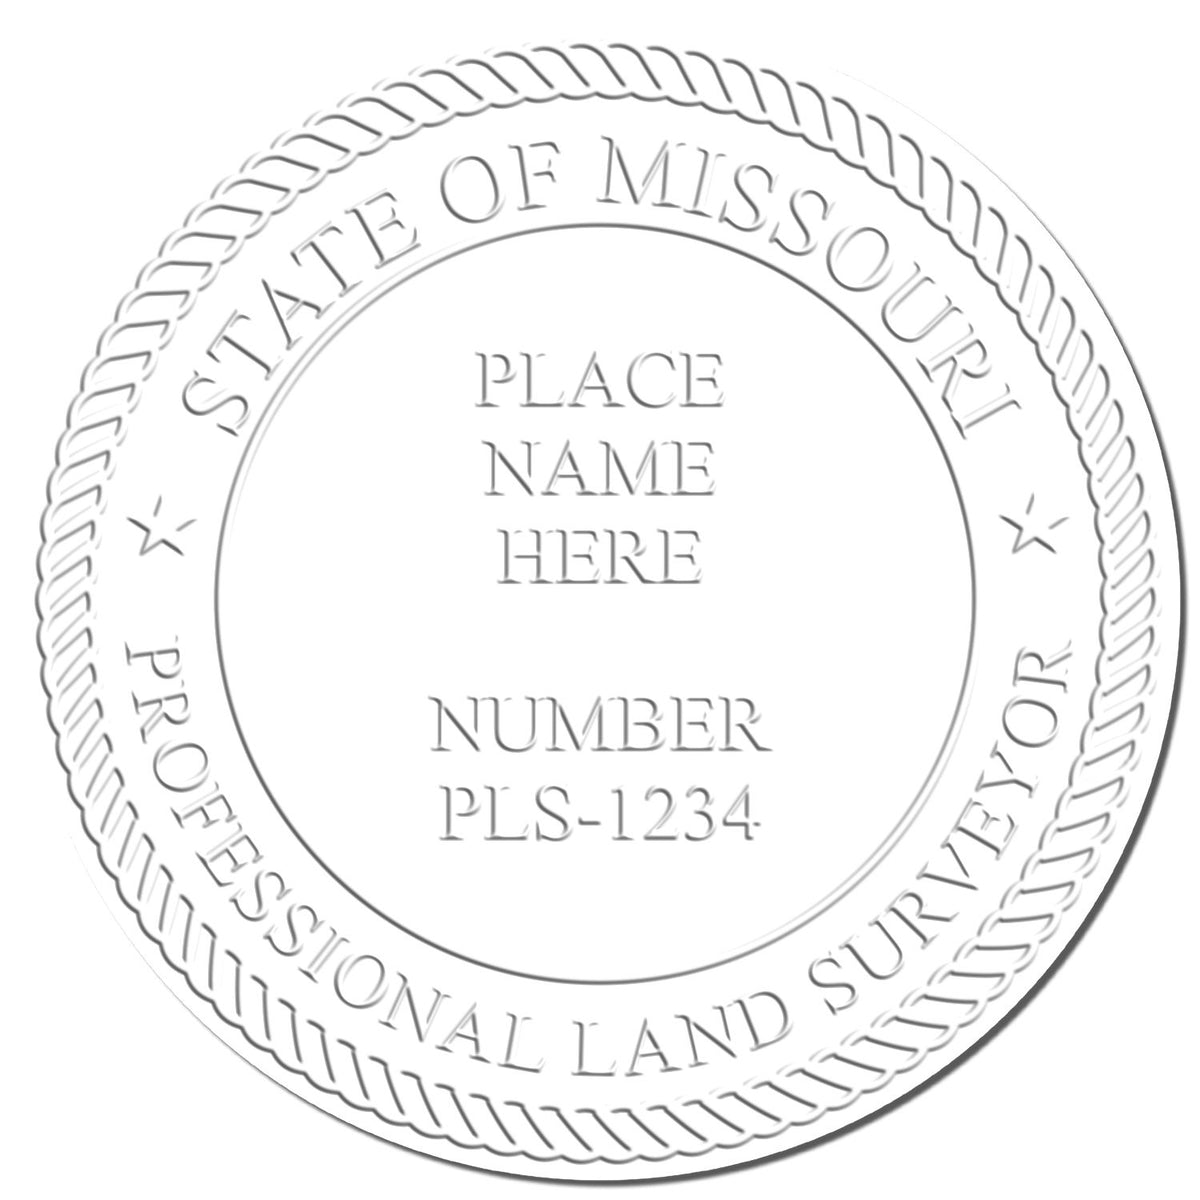 This paper is stamped with a sample imprint of the State of Missouri Soft Land Surveyor Embossing Seal, signifying its quality and reliability.